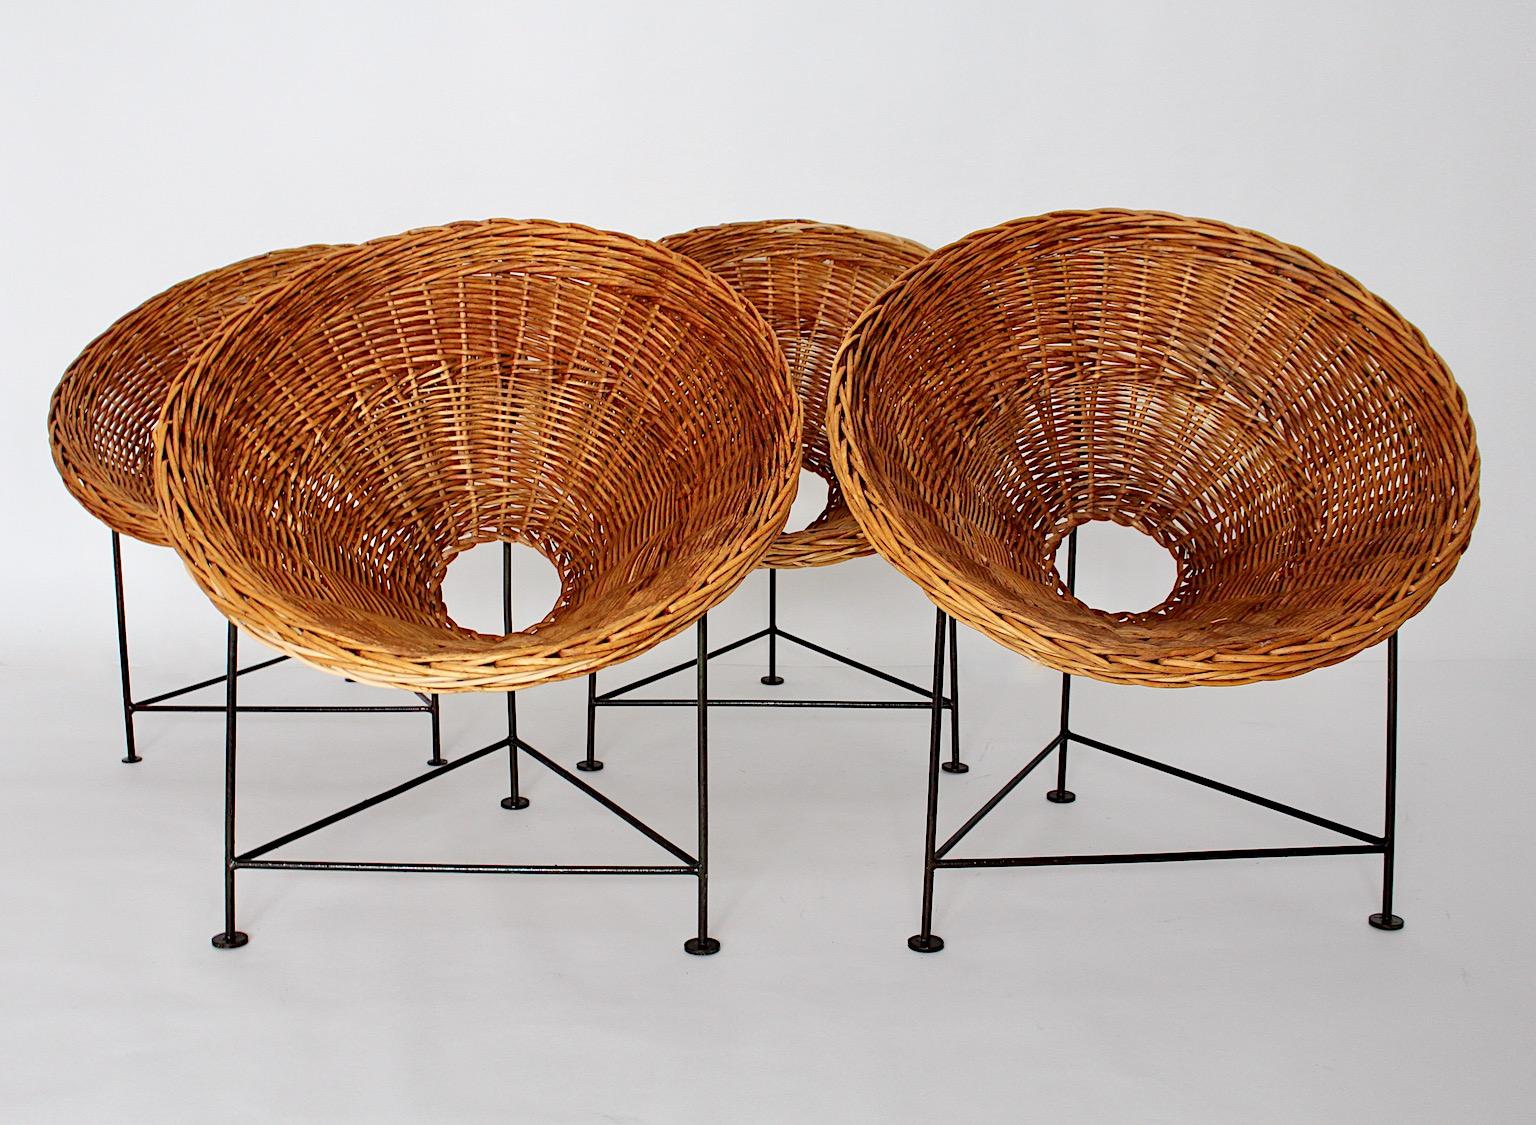 Mid-Century Modern vintage set of four lounge chairs or patio chairs from willow network and black lacquered metal frame.
The beautiful bucket or cone seat from willow network in a honey brown tone to which you could add bright shades for a lively